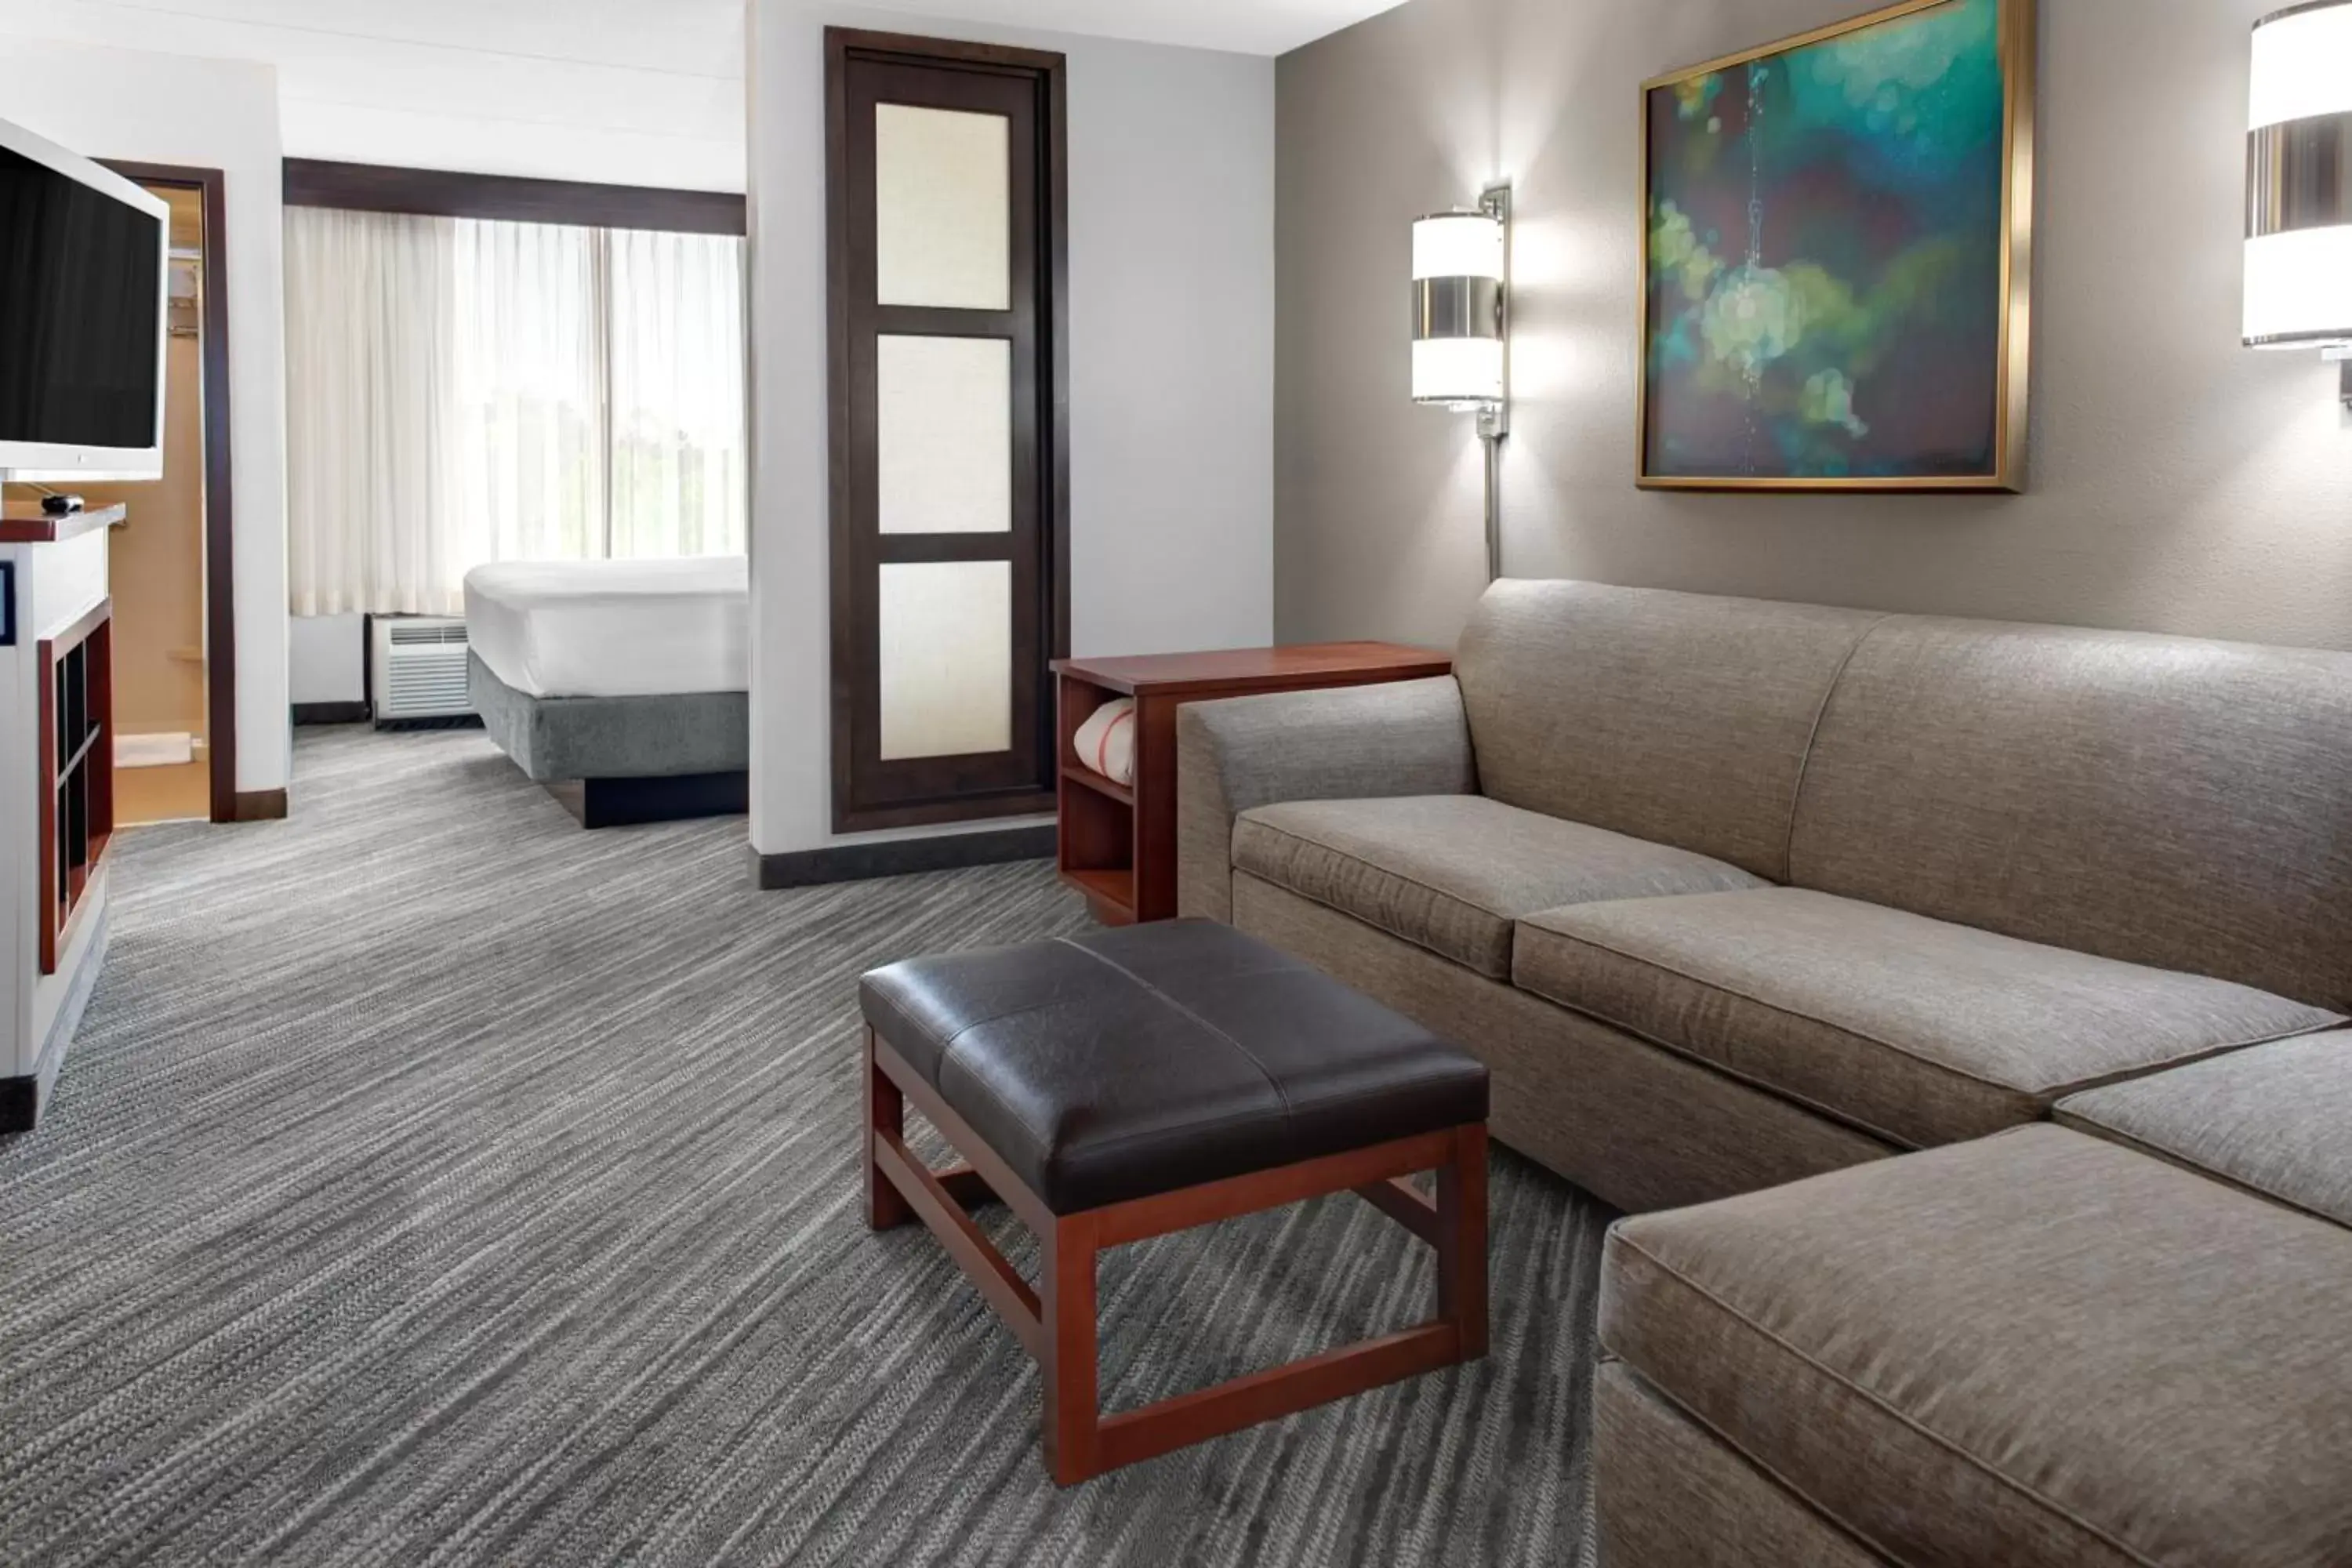 Specialty King Room with Sofa Bed in Hyatt Place Nashville Brentwood